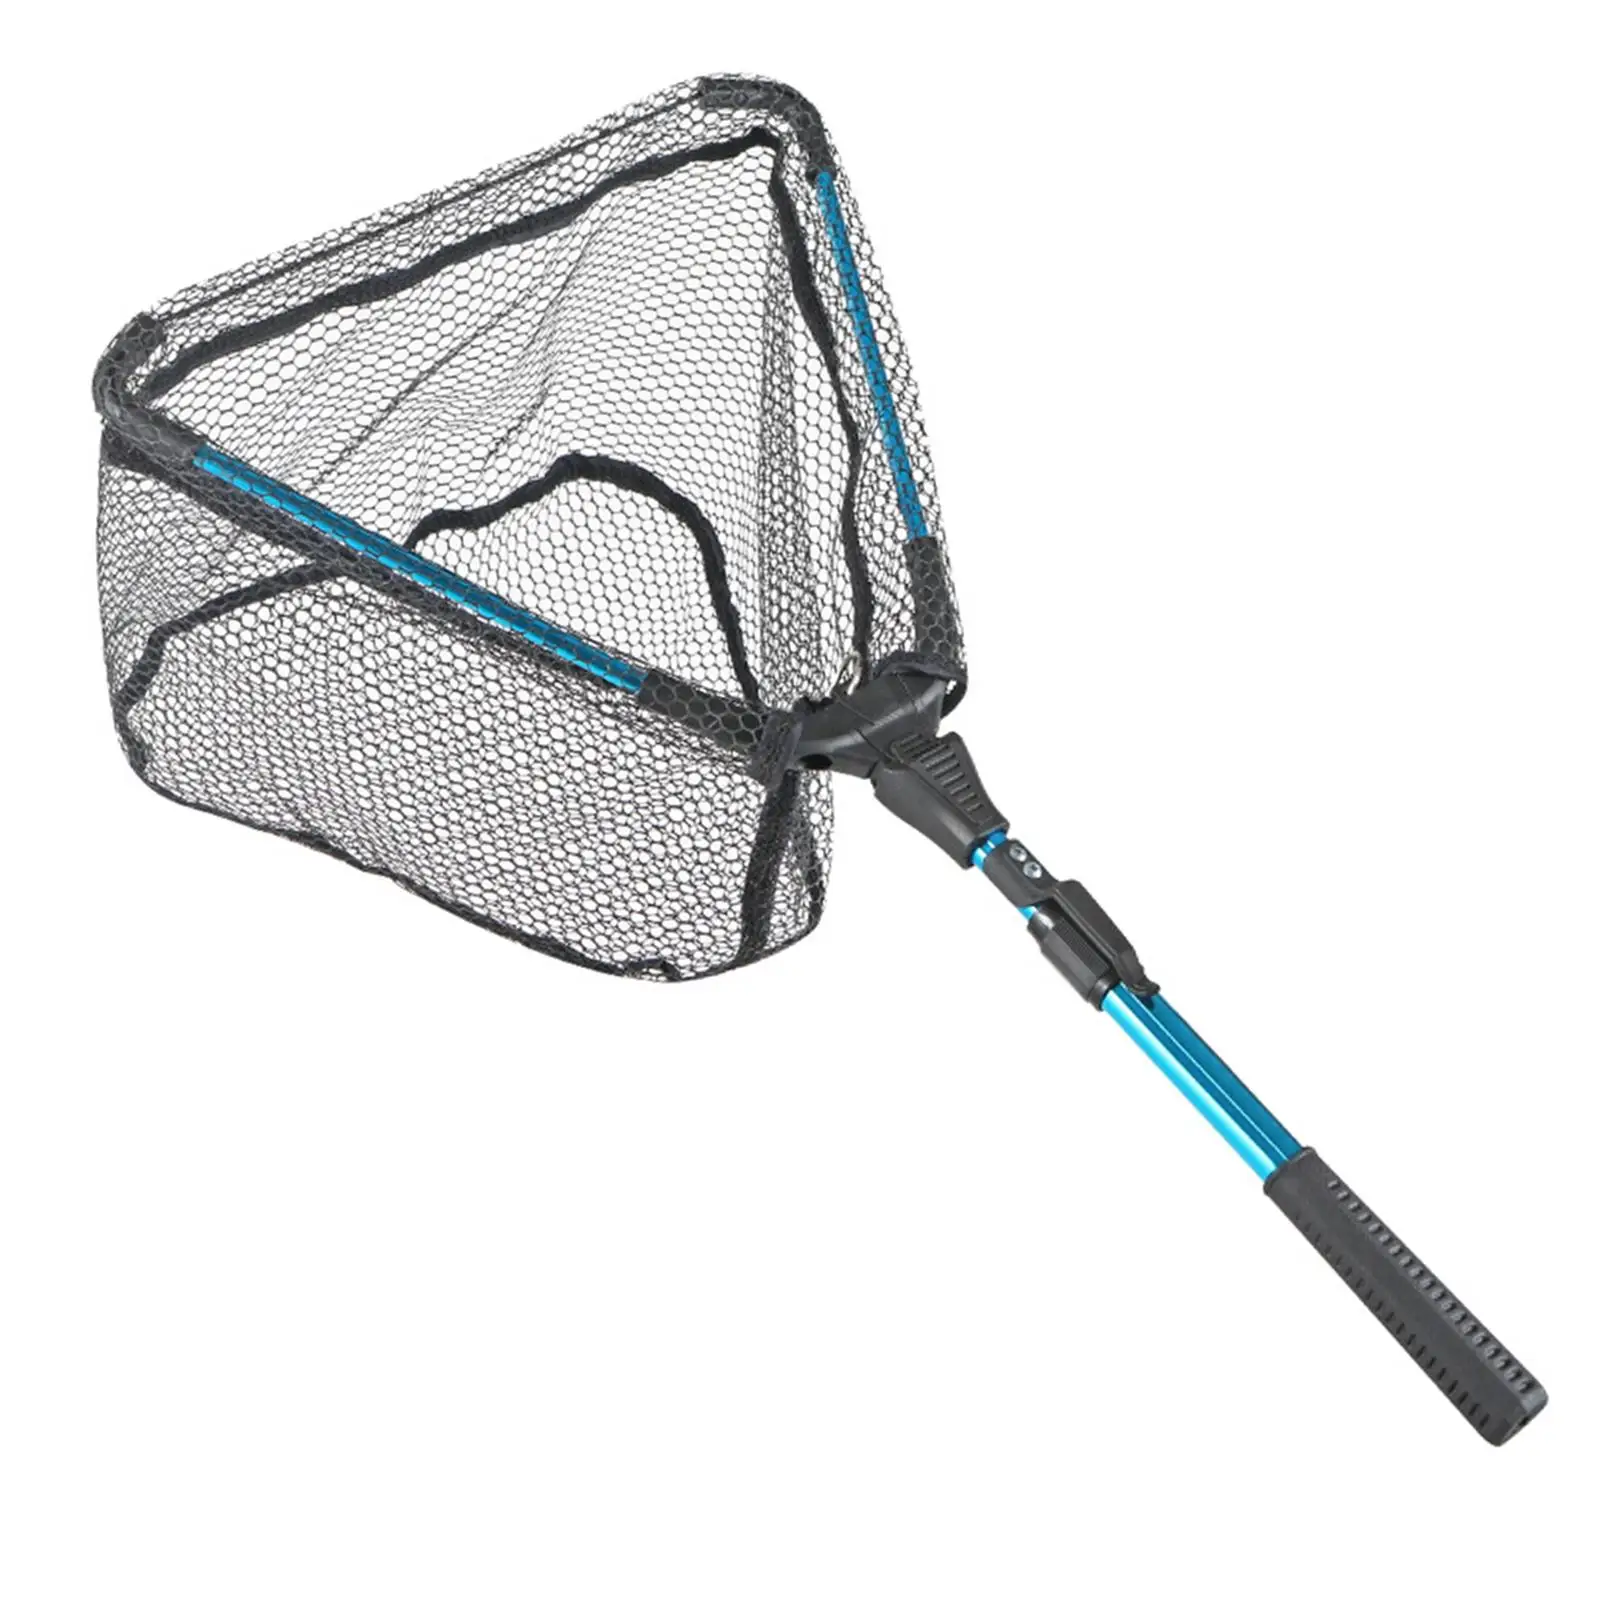 Fishing Nets Fish Telescopic Pole Retractable Lightweight Folding Fish Net Scoop Collapsible for Catfish Saltwater River Fishing